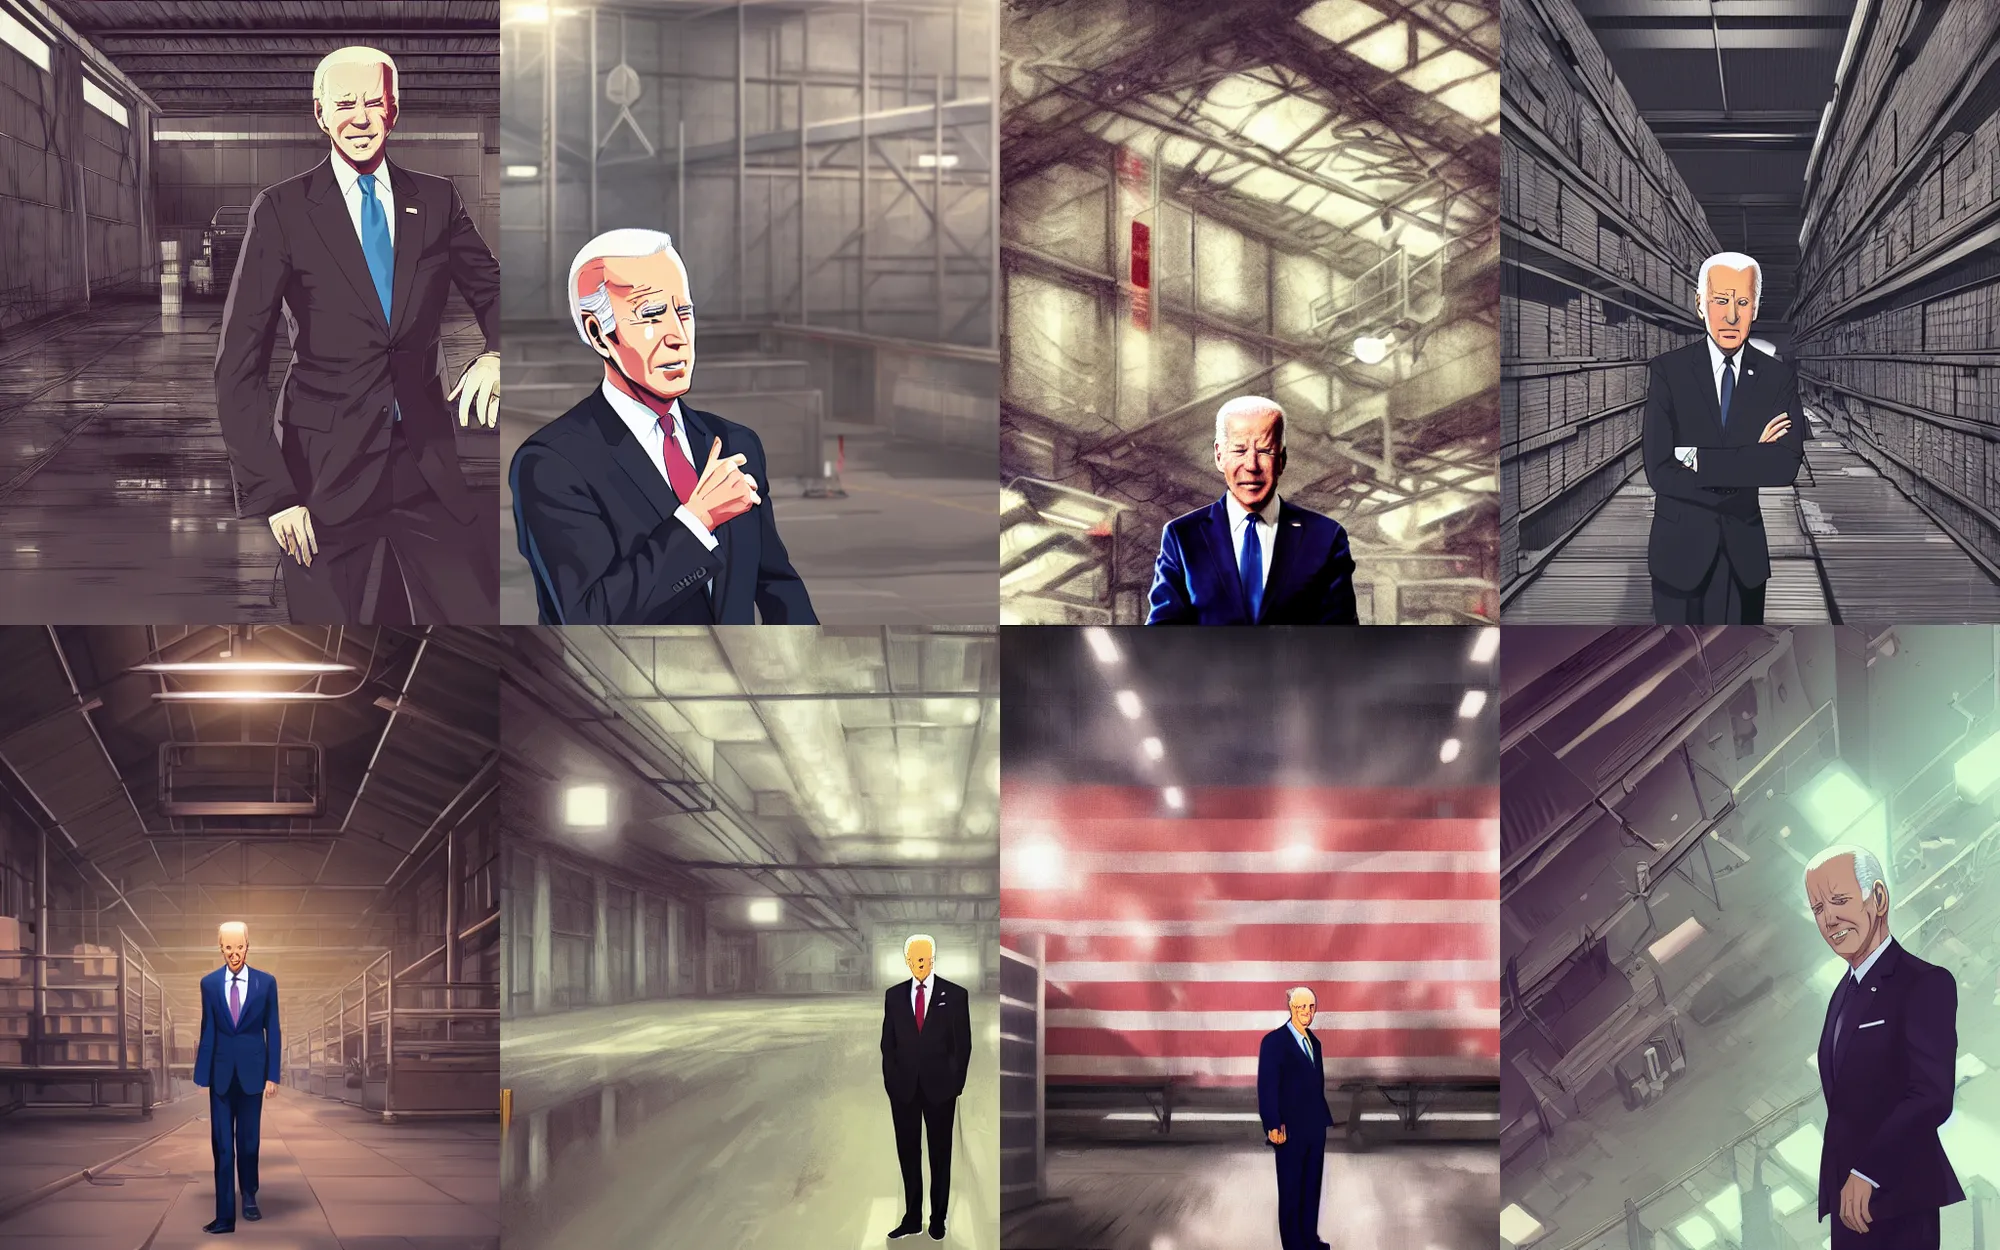 Prompt: Digital presidential, anime art by WLOP and Mobius, Joe Biden, serious expression, [empty warehouse] background, highly detailed, spotlight